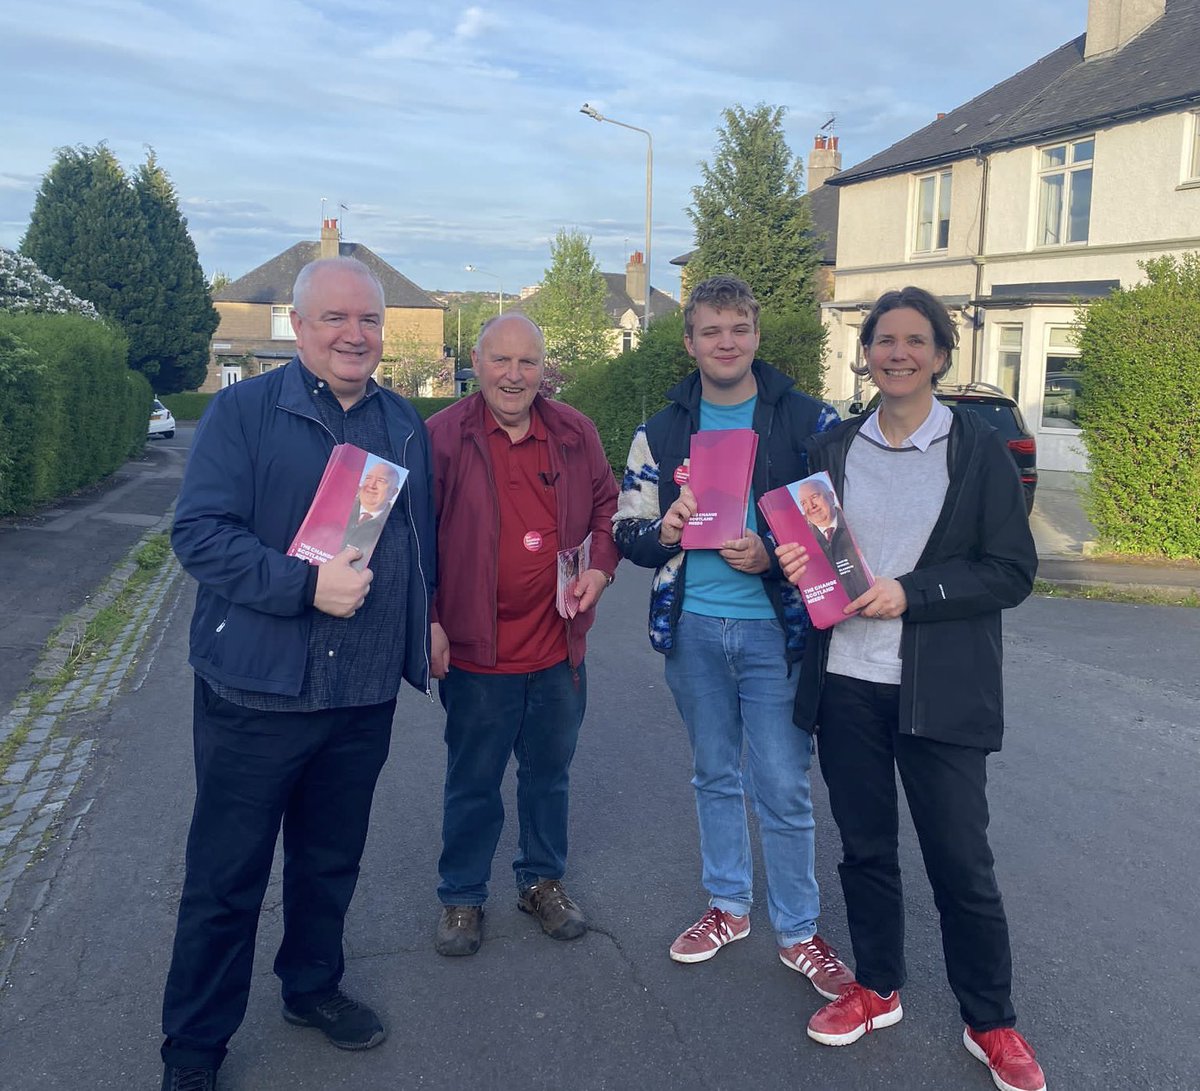 In Kelvindale this evening with local councillor @JillBGlasgow and the team - people telling us that they want a general election as soon as possible to get rid of a failed government. #GENow #VoteScotLab24 #Win24